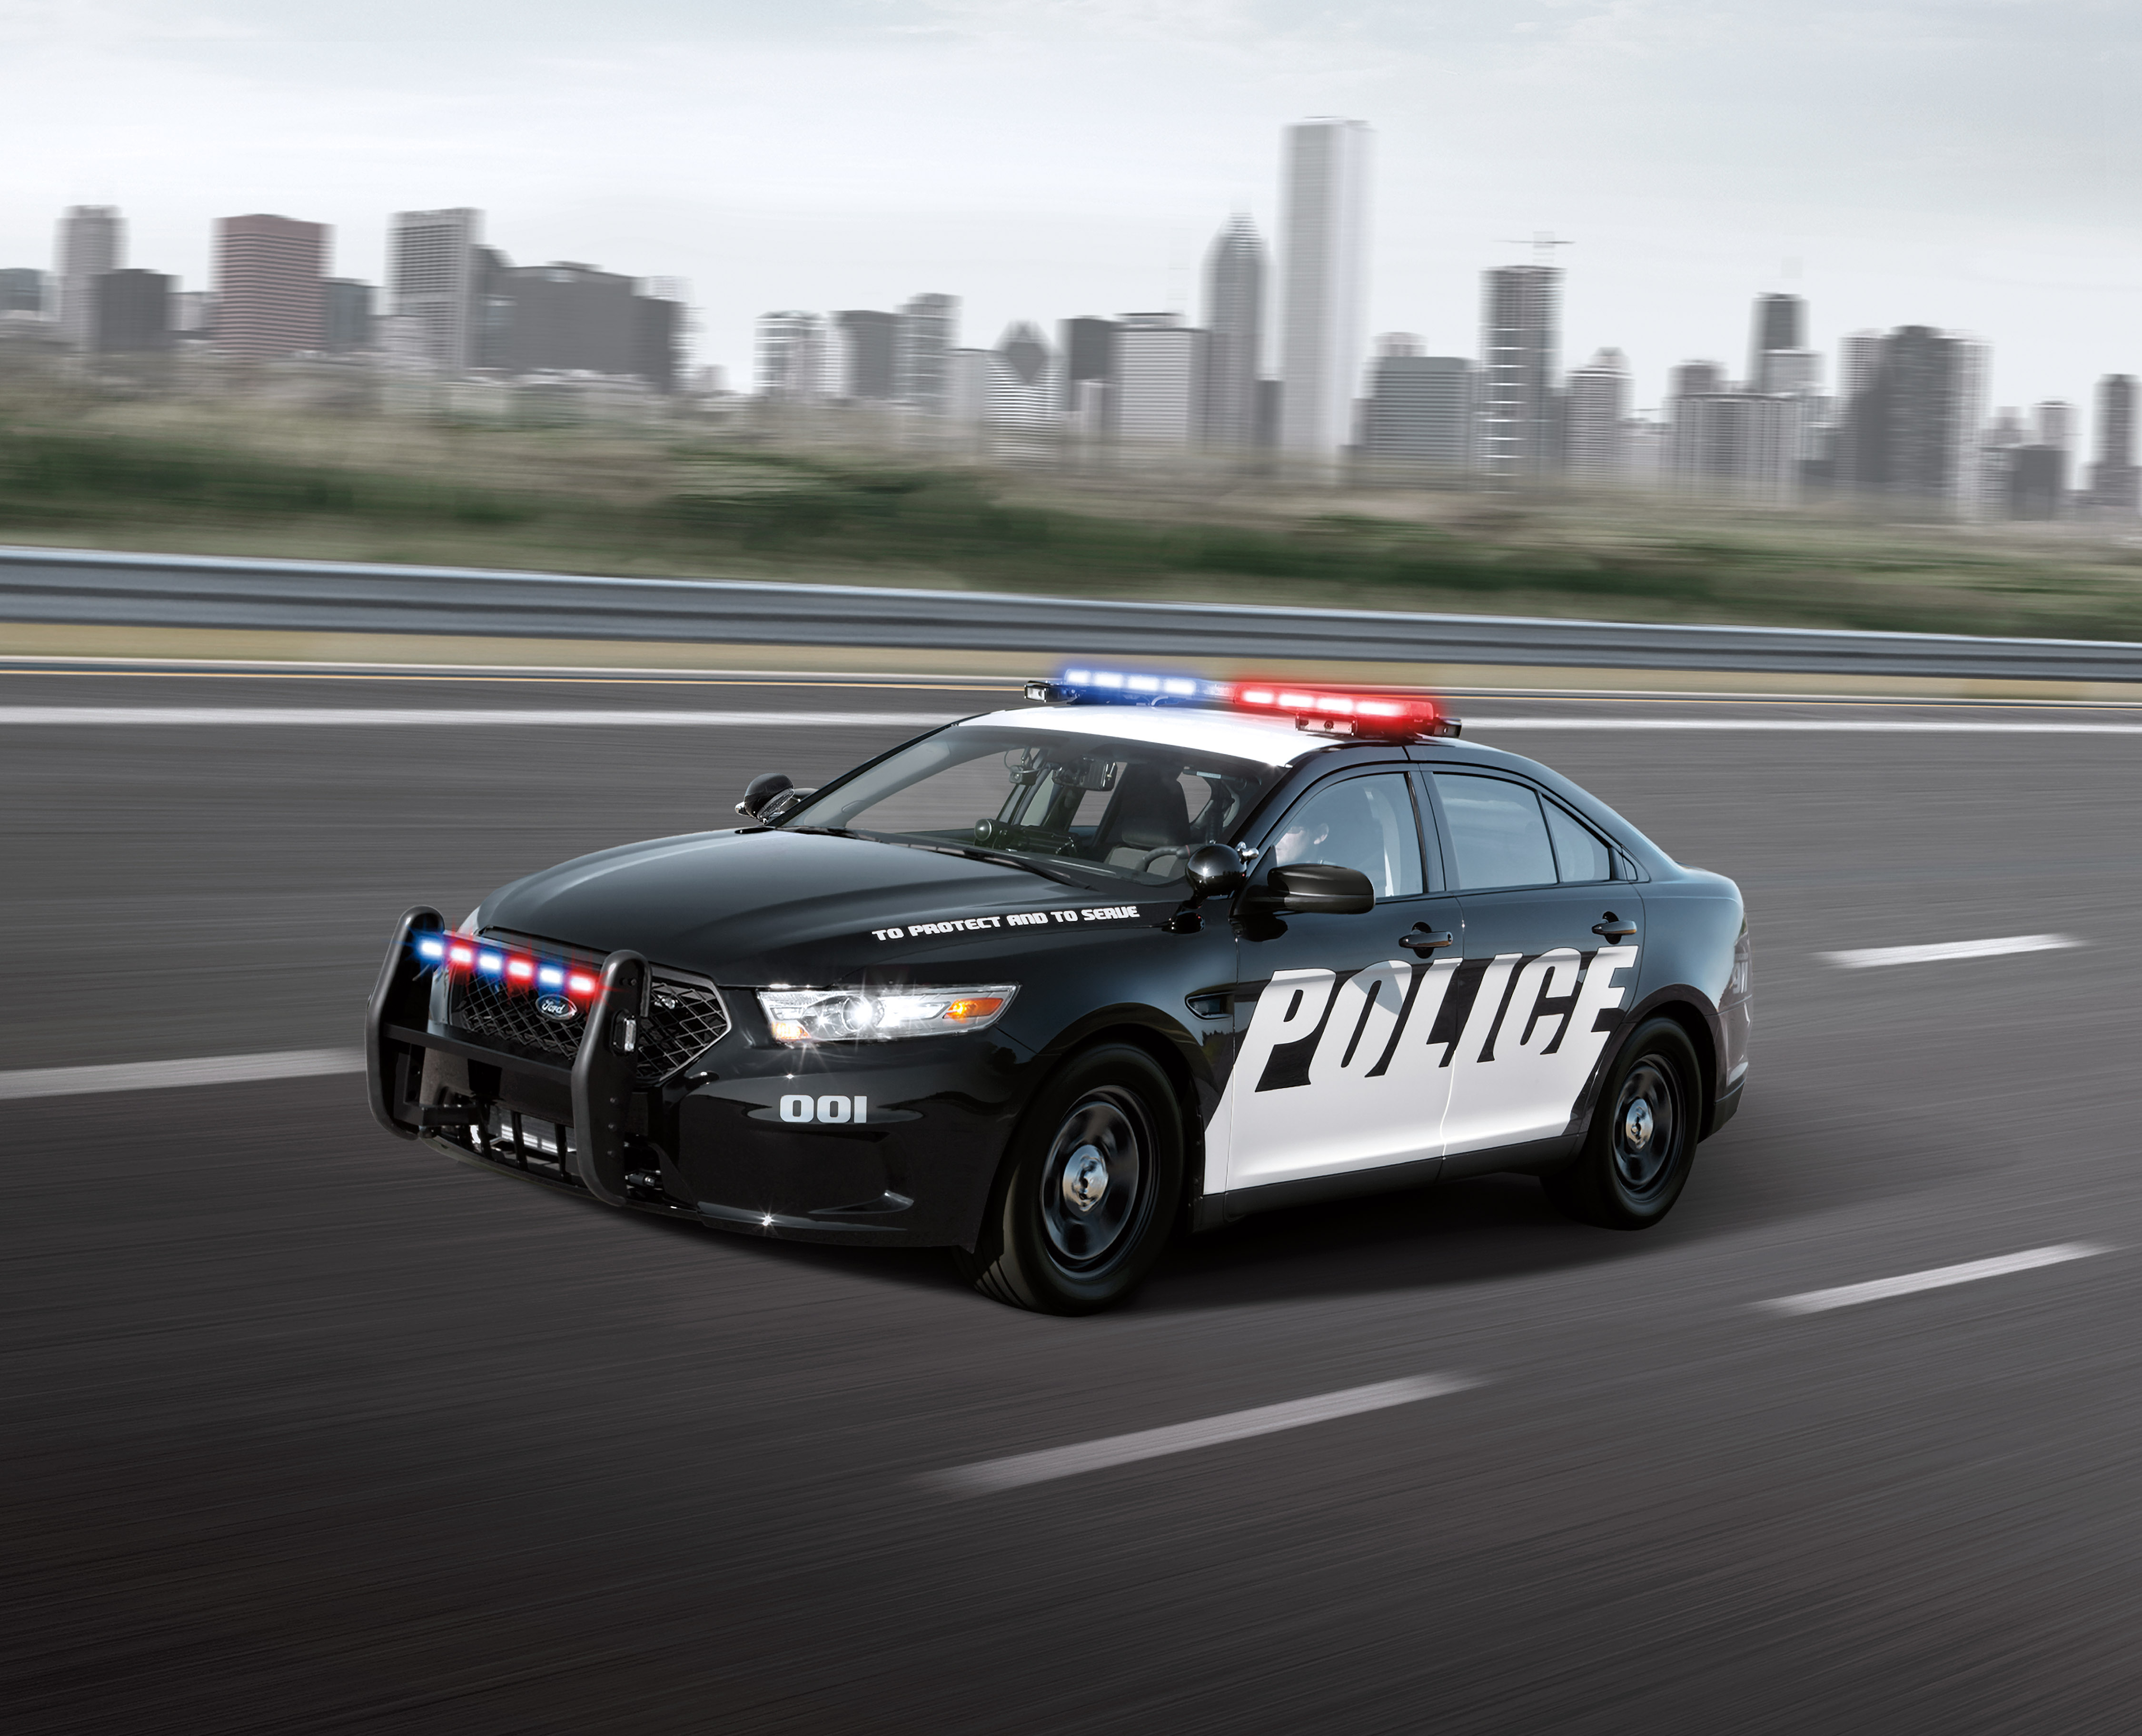 FORD ECOBOOST POLICE INTERCEPTORS REPEAT AS QUICKEST ACCELERATING IN STATE TESTING IN MICHIGAN & CALIFORNIA